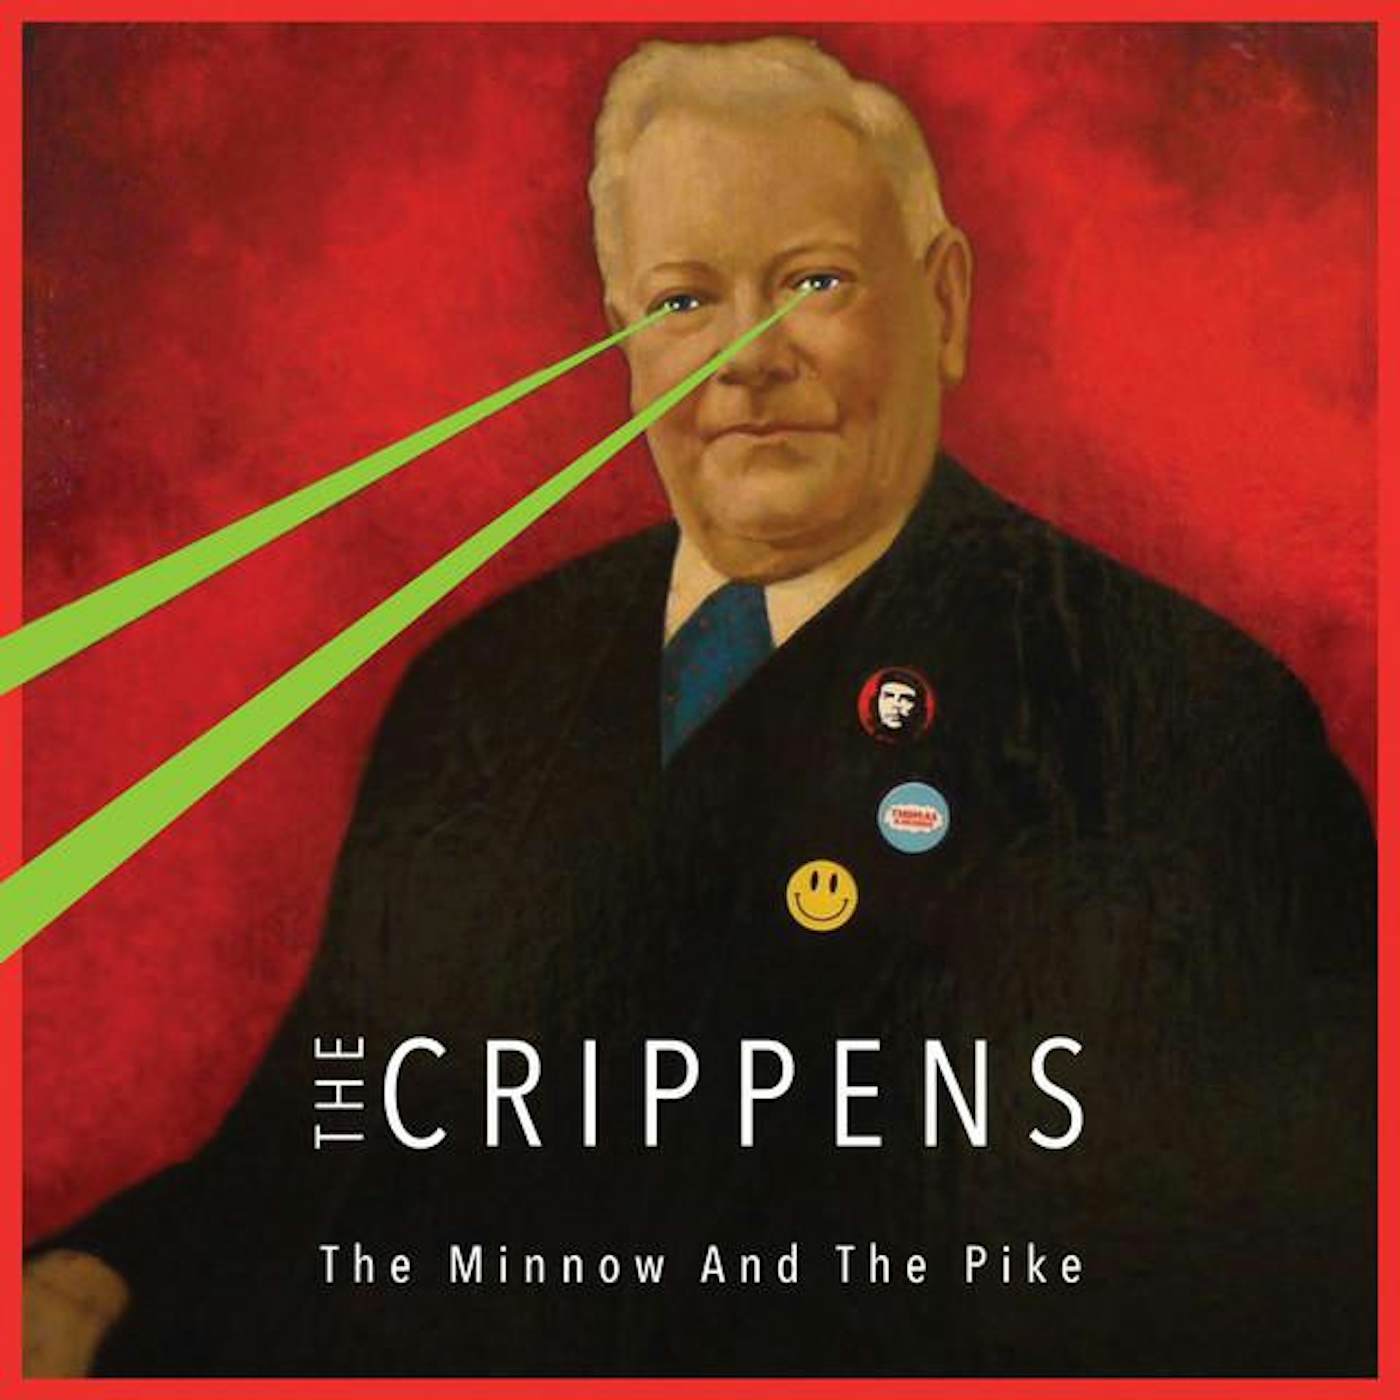 The Crippens